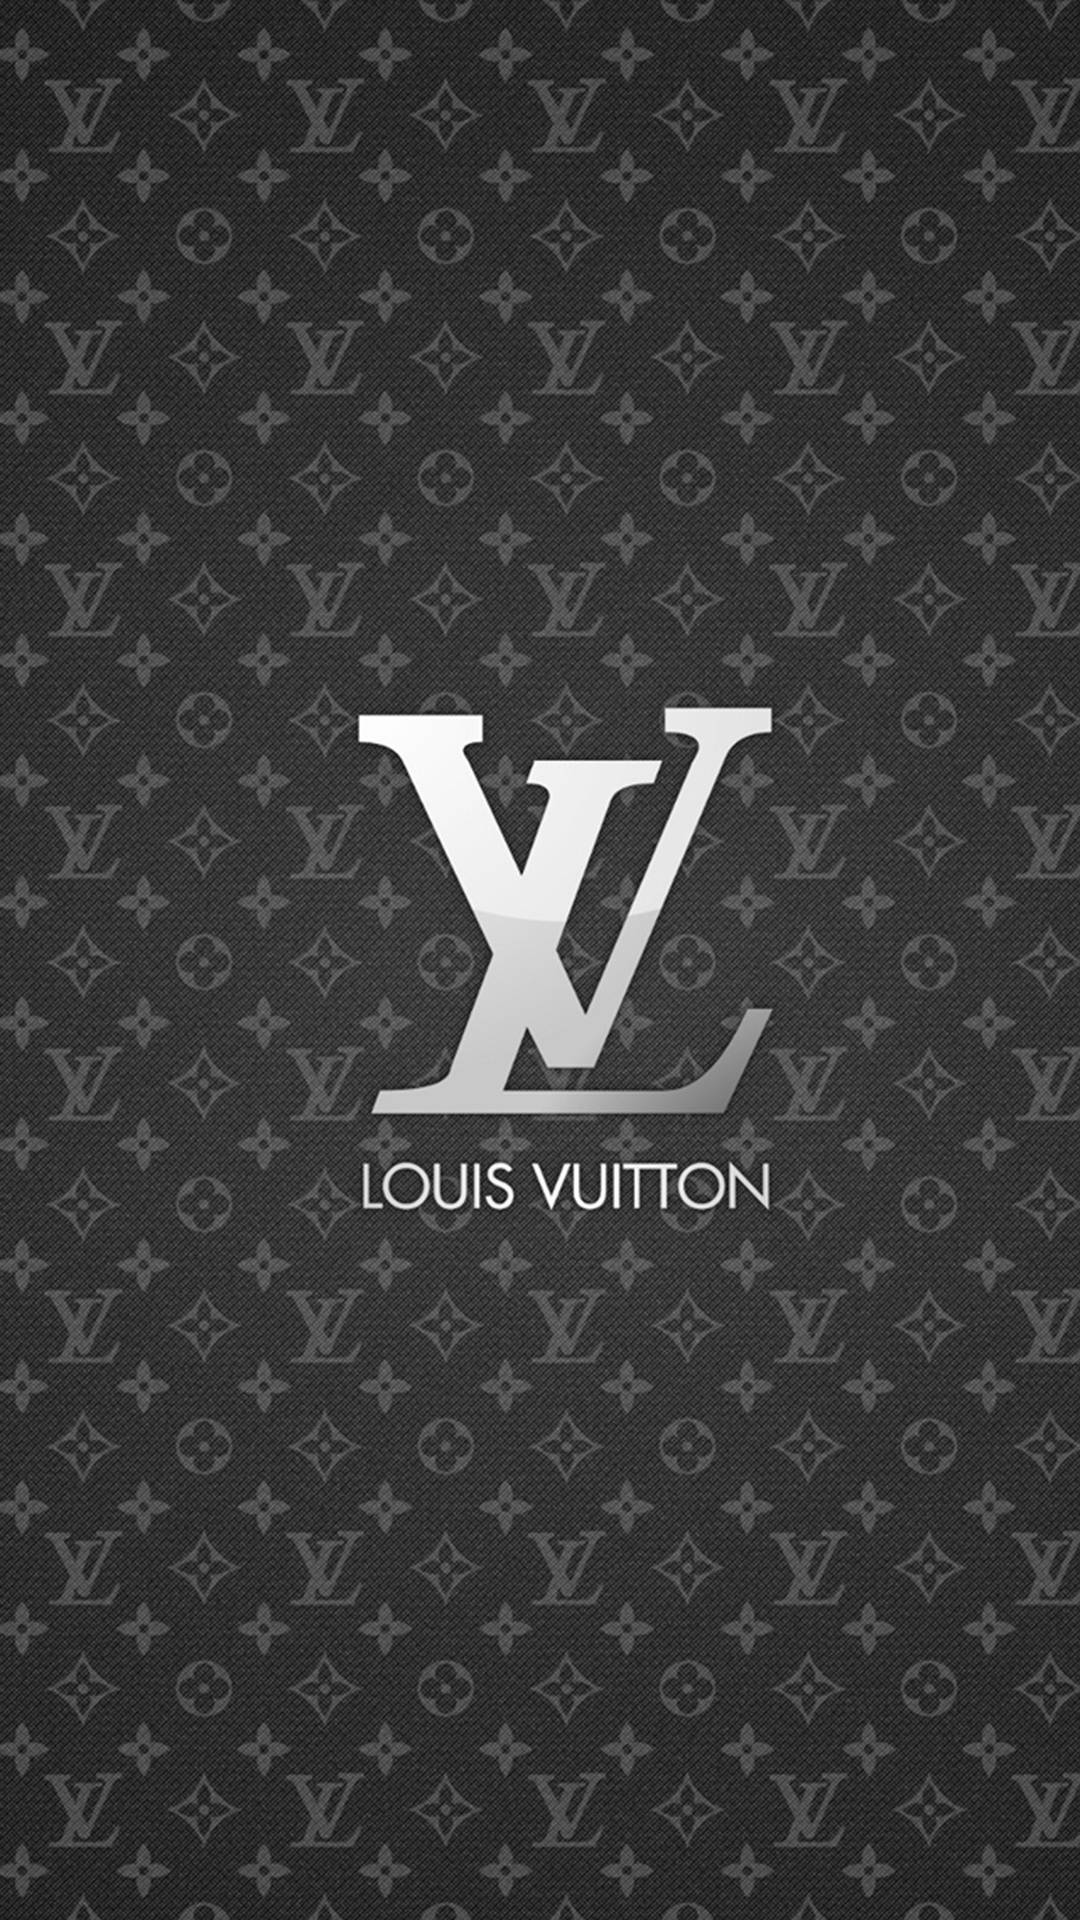 Silver And Grey Louis Vuitton Phone Wallpaper